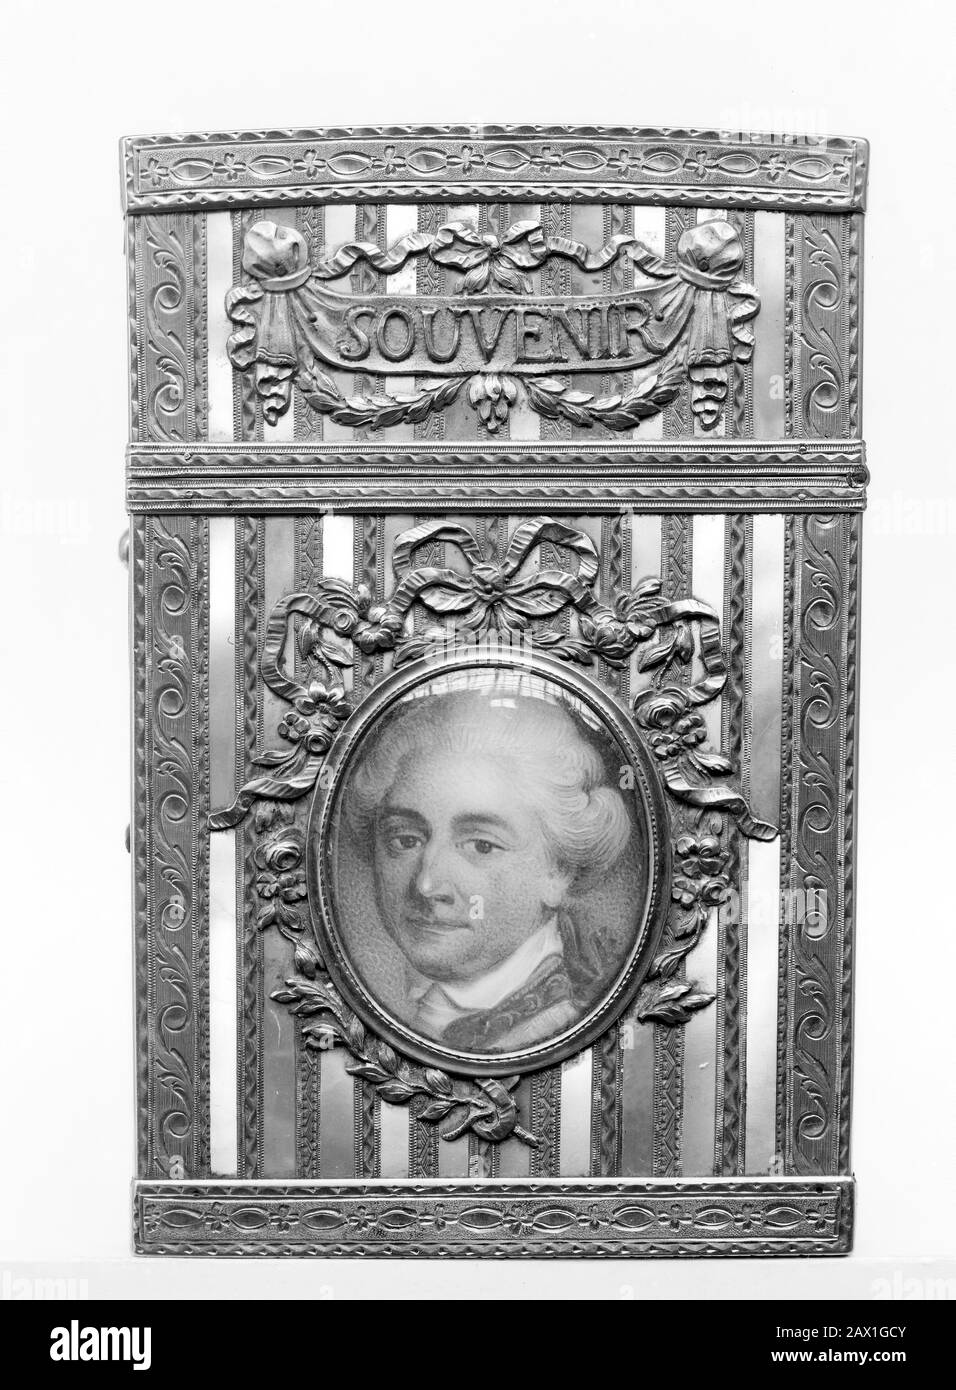 Souvenir with portrait of Stanislaus II, King of Poland, ca. 1770-80. Stock Photo